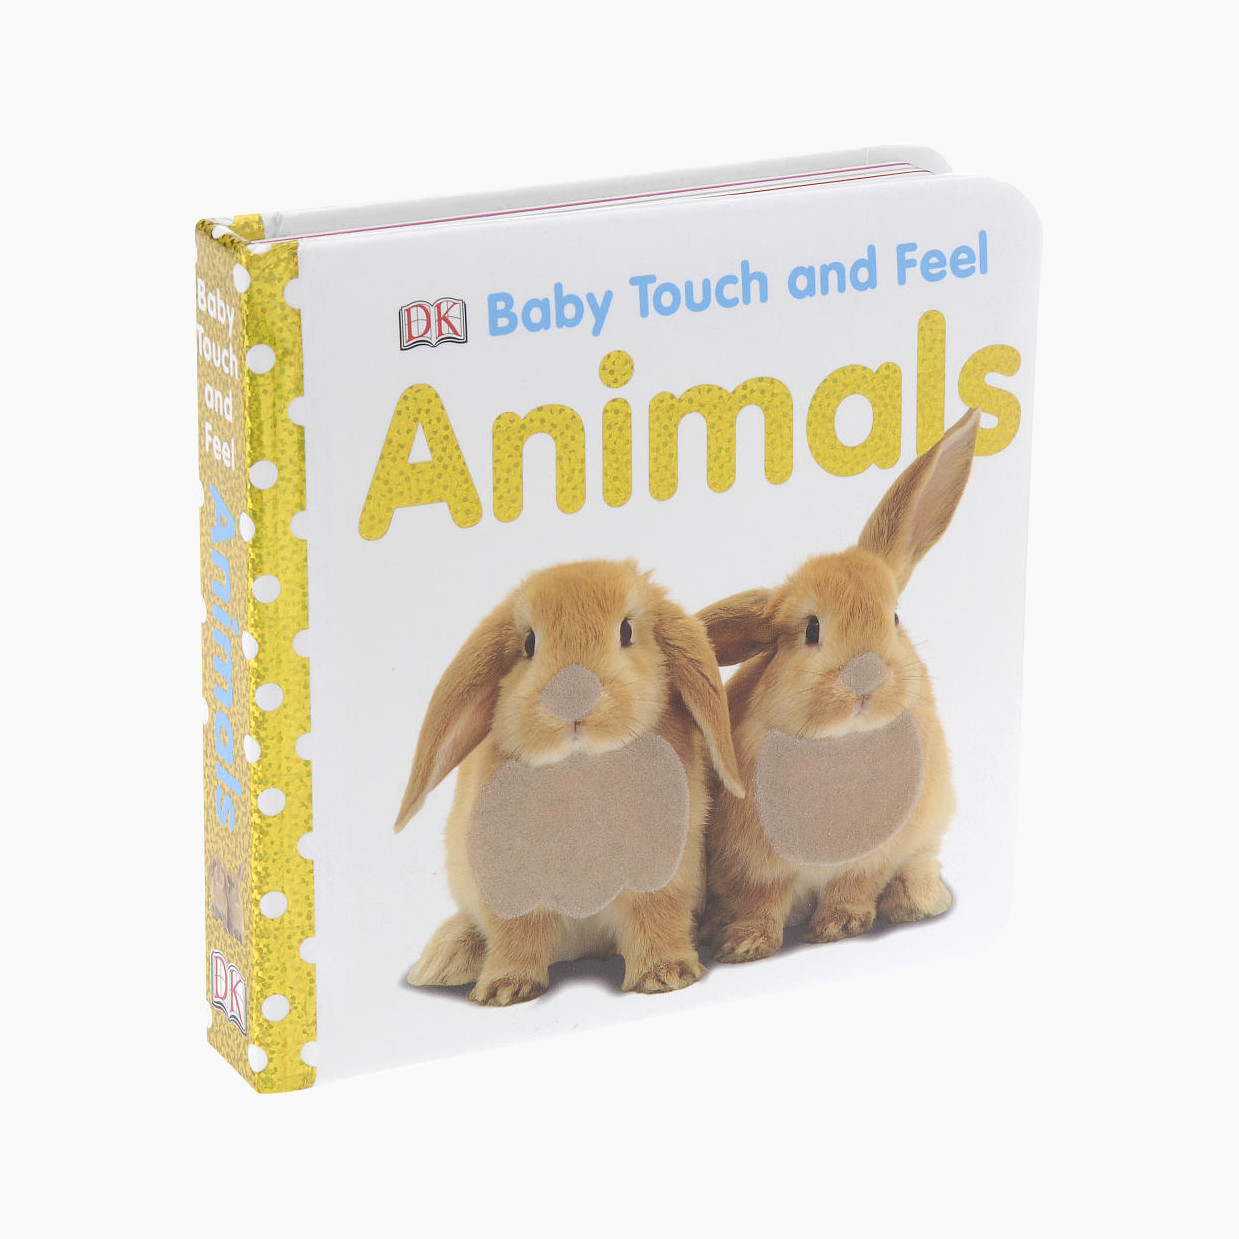 Baby Touch and Feel Animals.